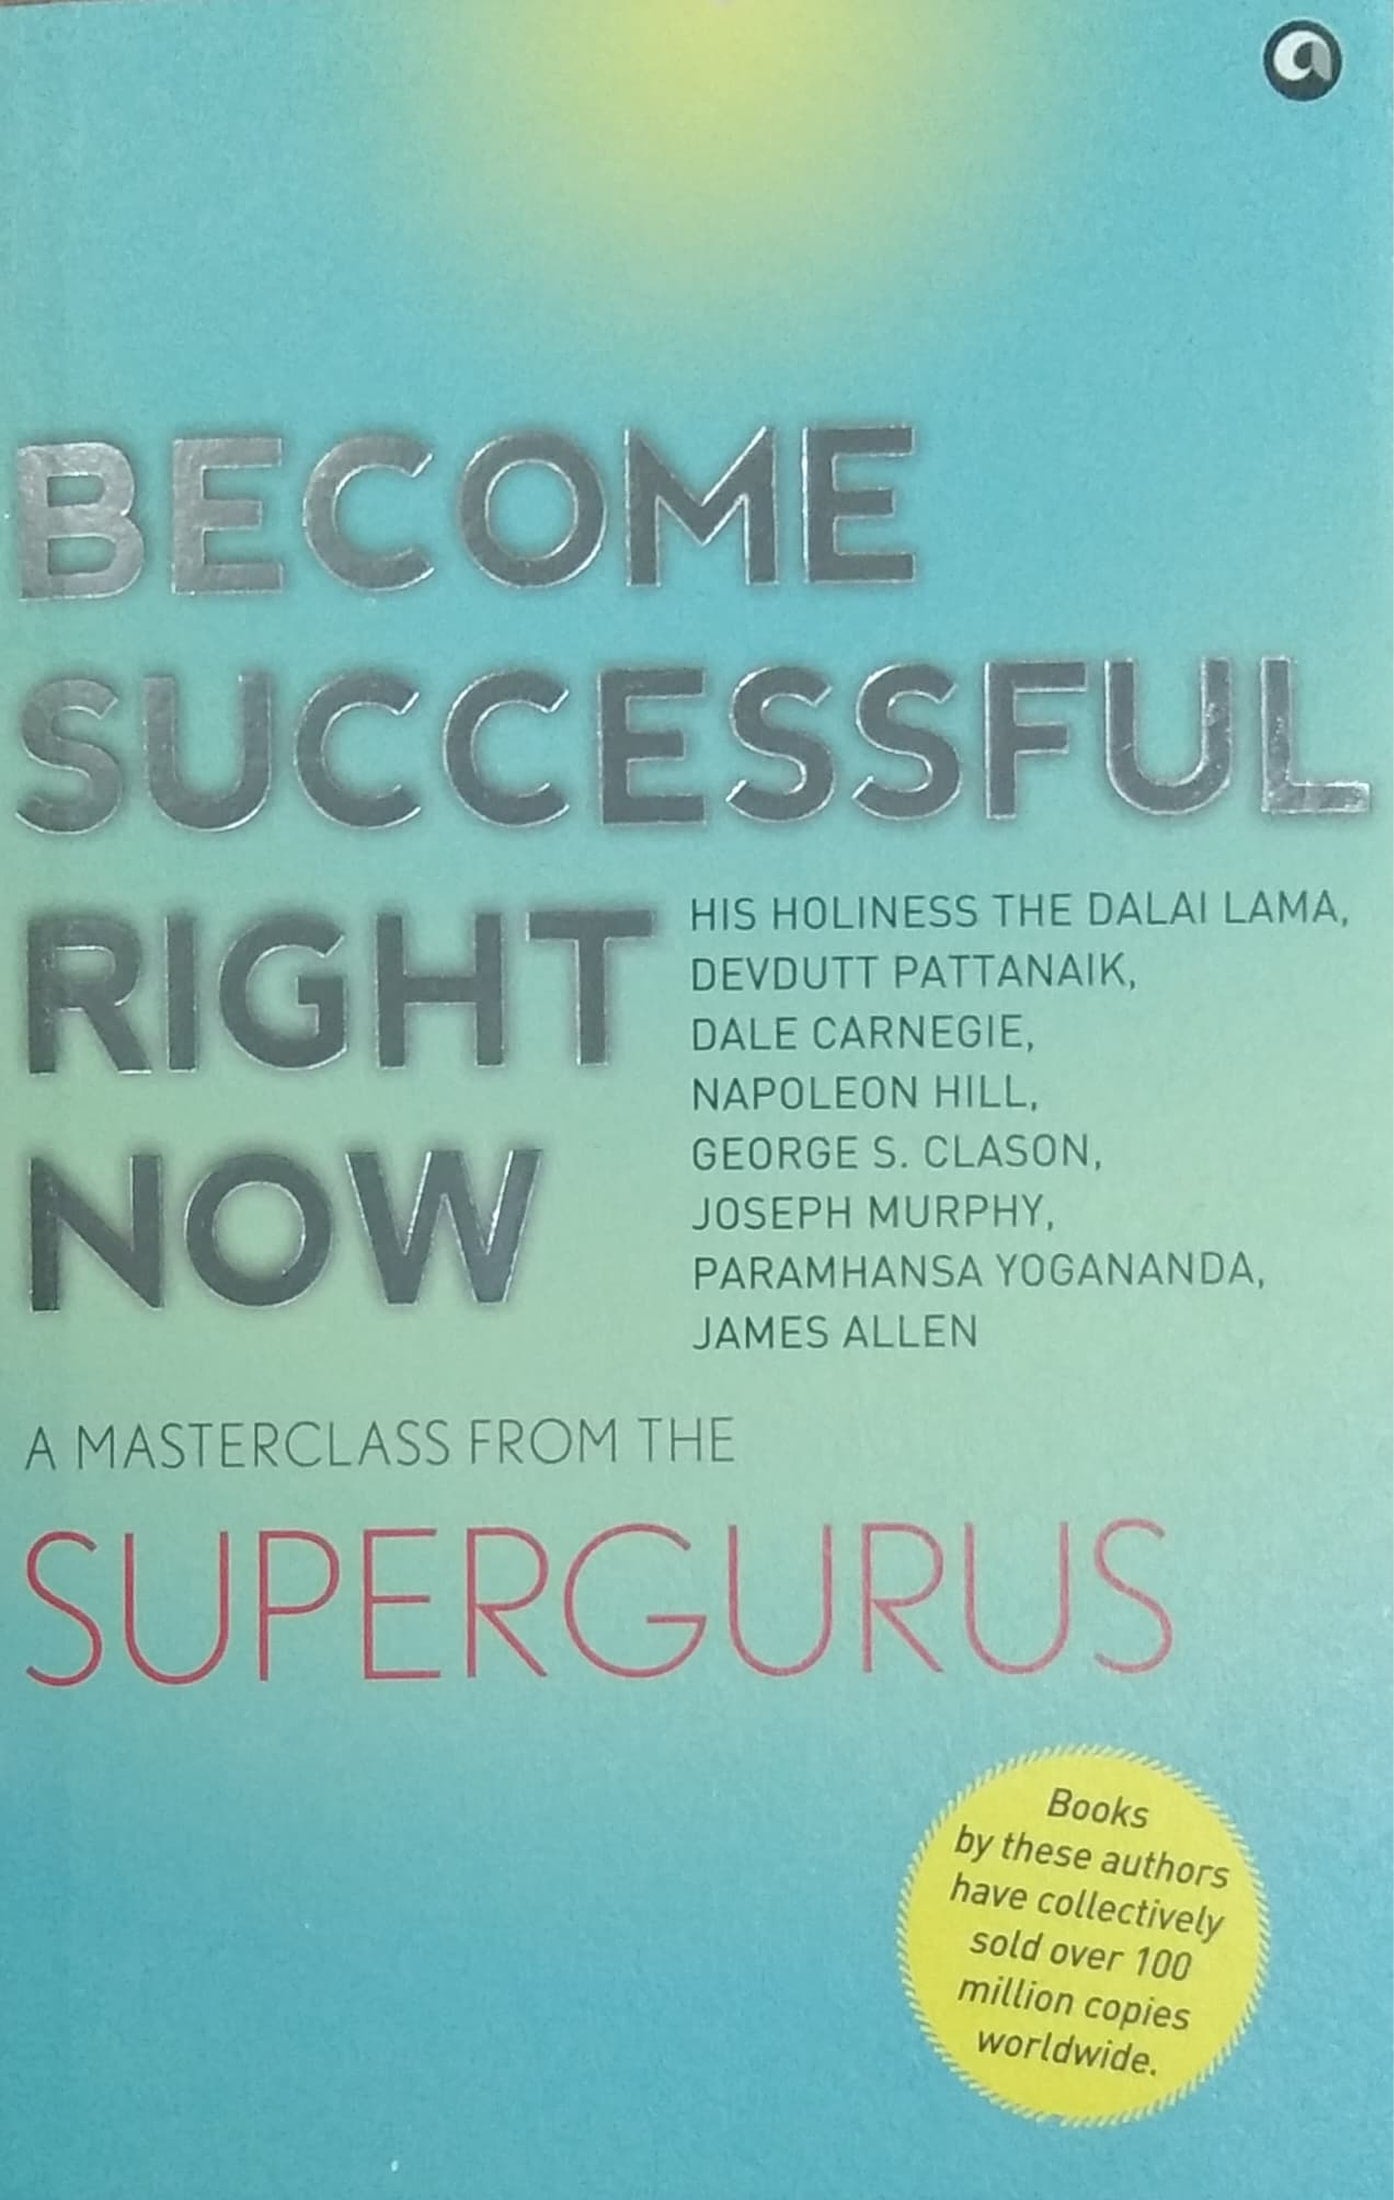 Become Successful Right Now